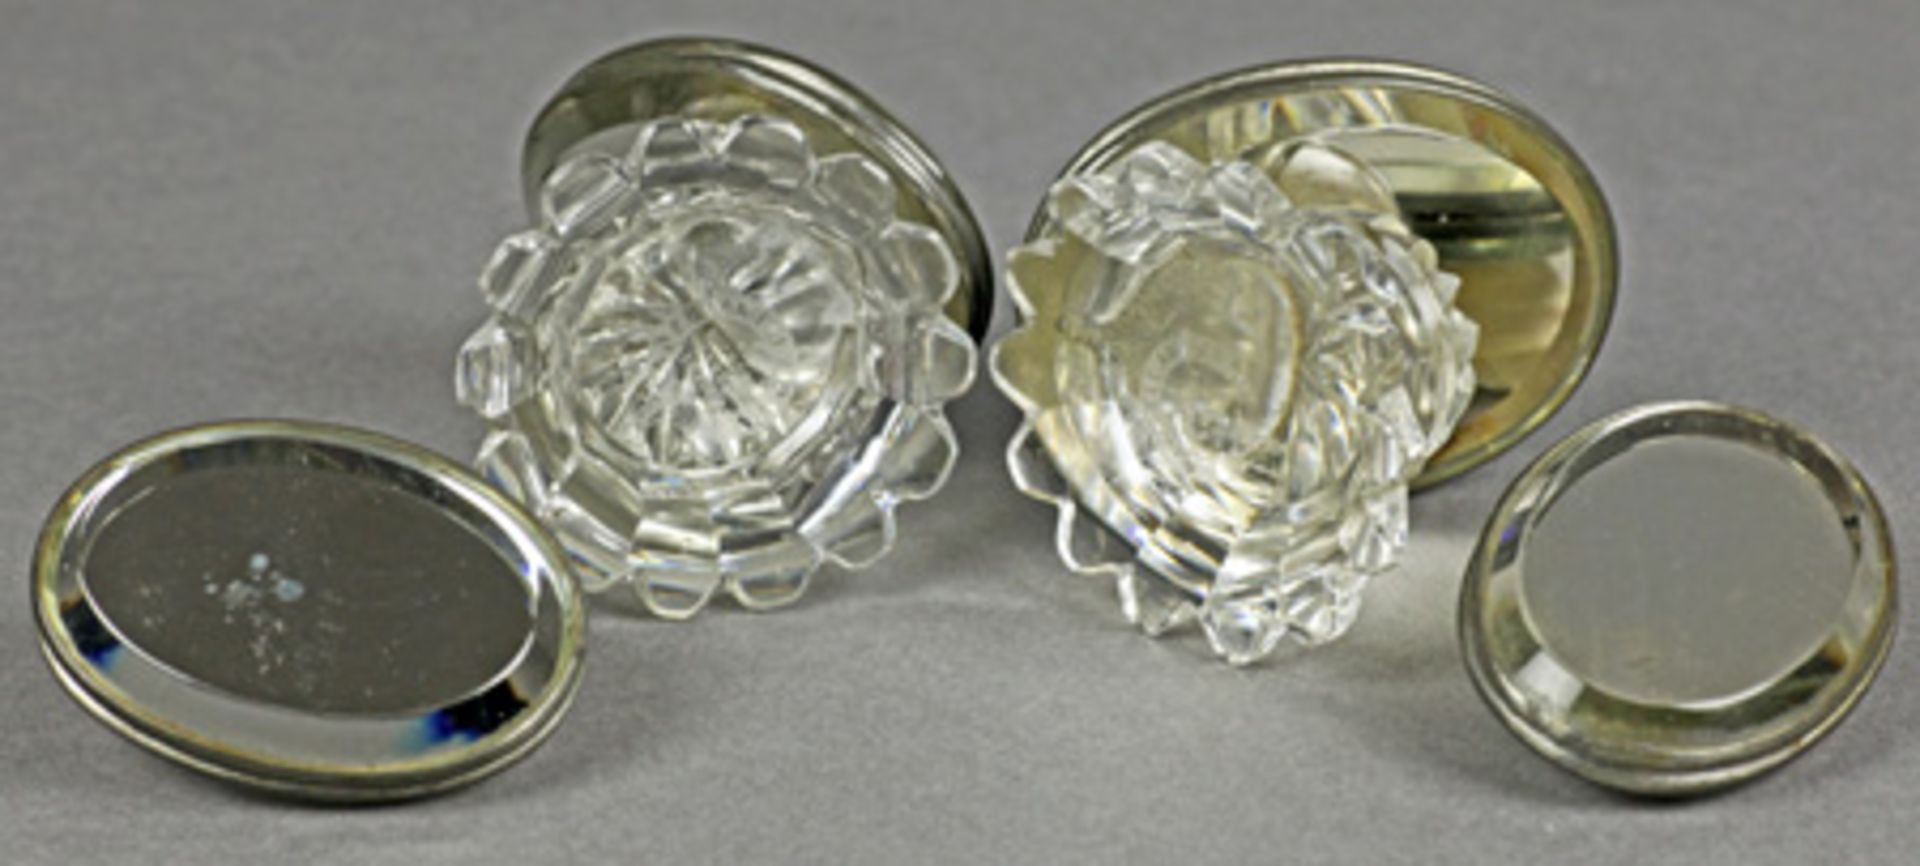 Pair Crested Glass Menu Holders And Place Markers C.1900 - Image 5 of 9